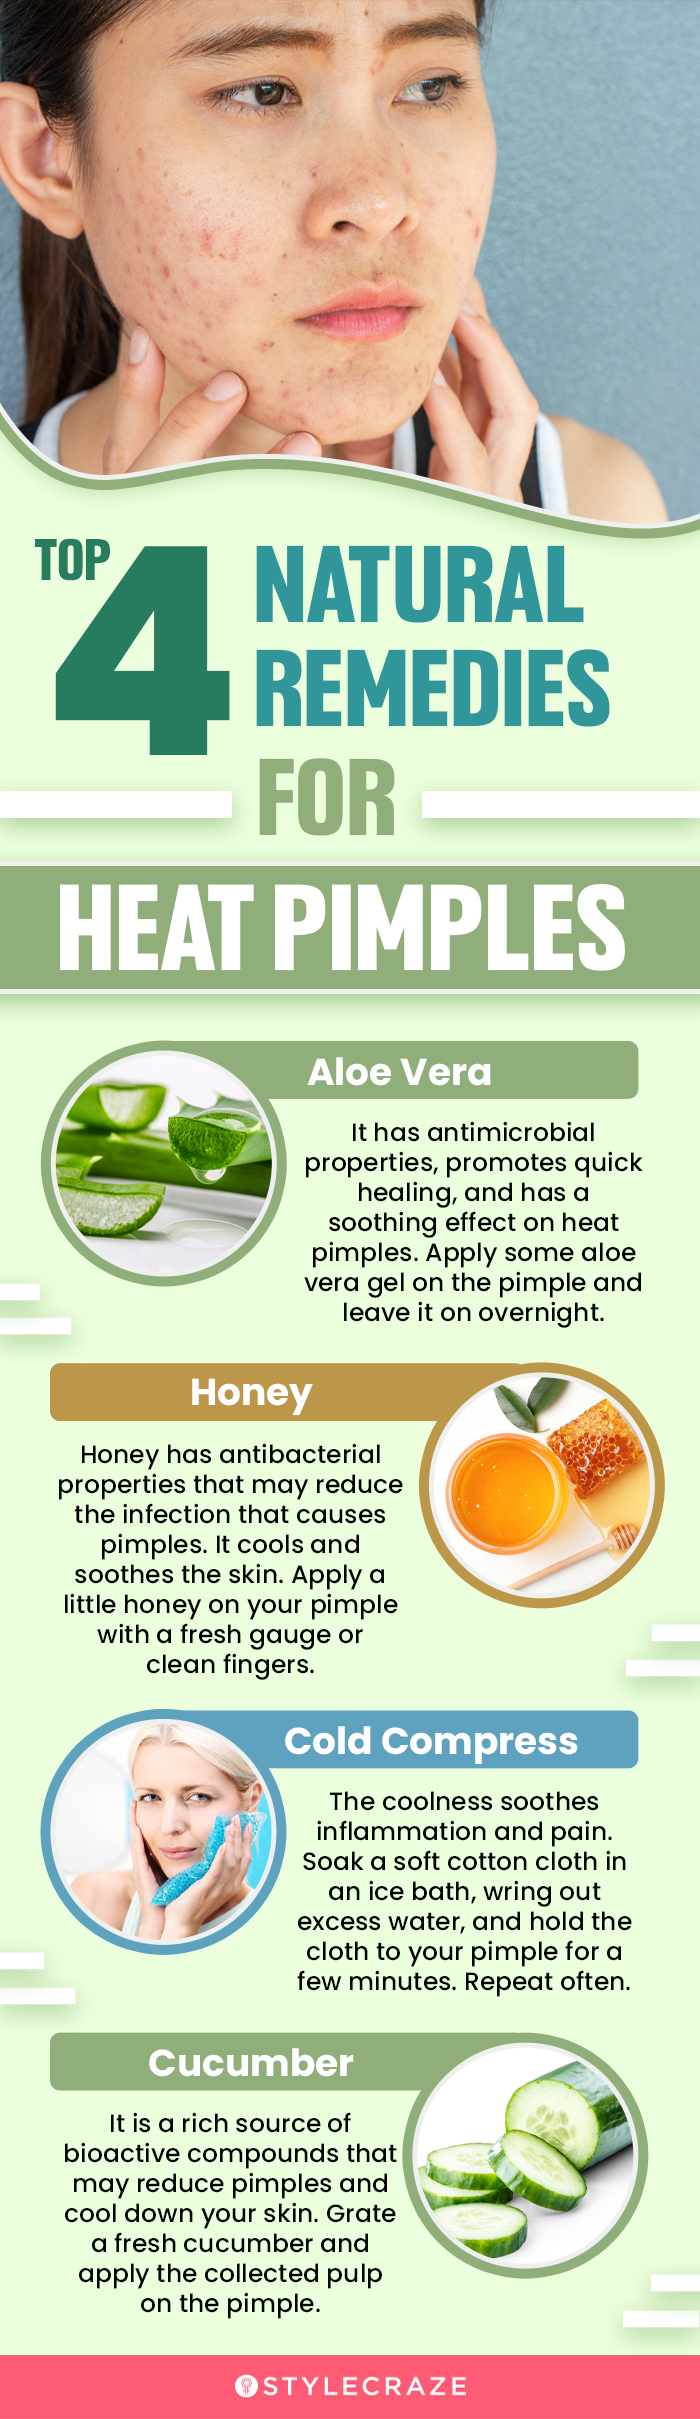 top 4 natural remedies for heat pimples (infographic)